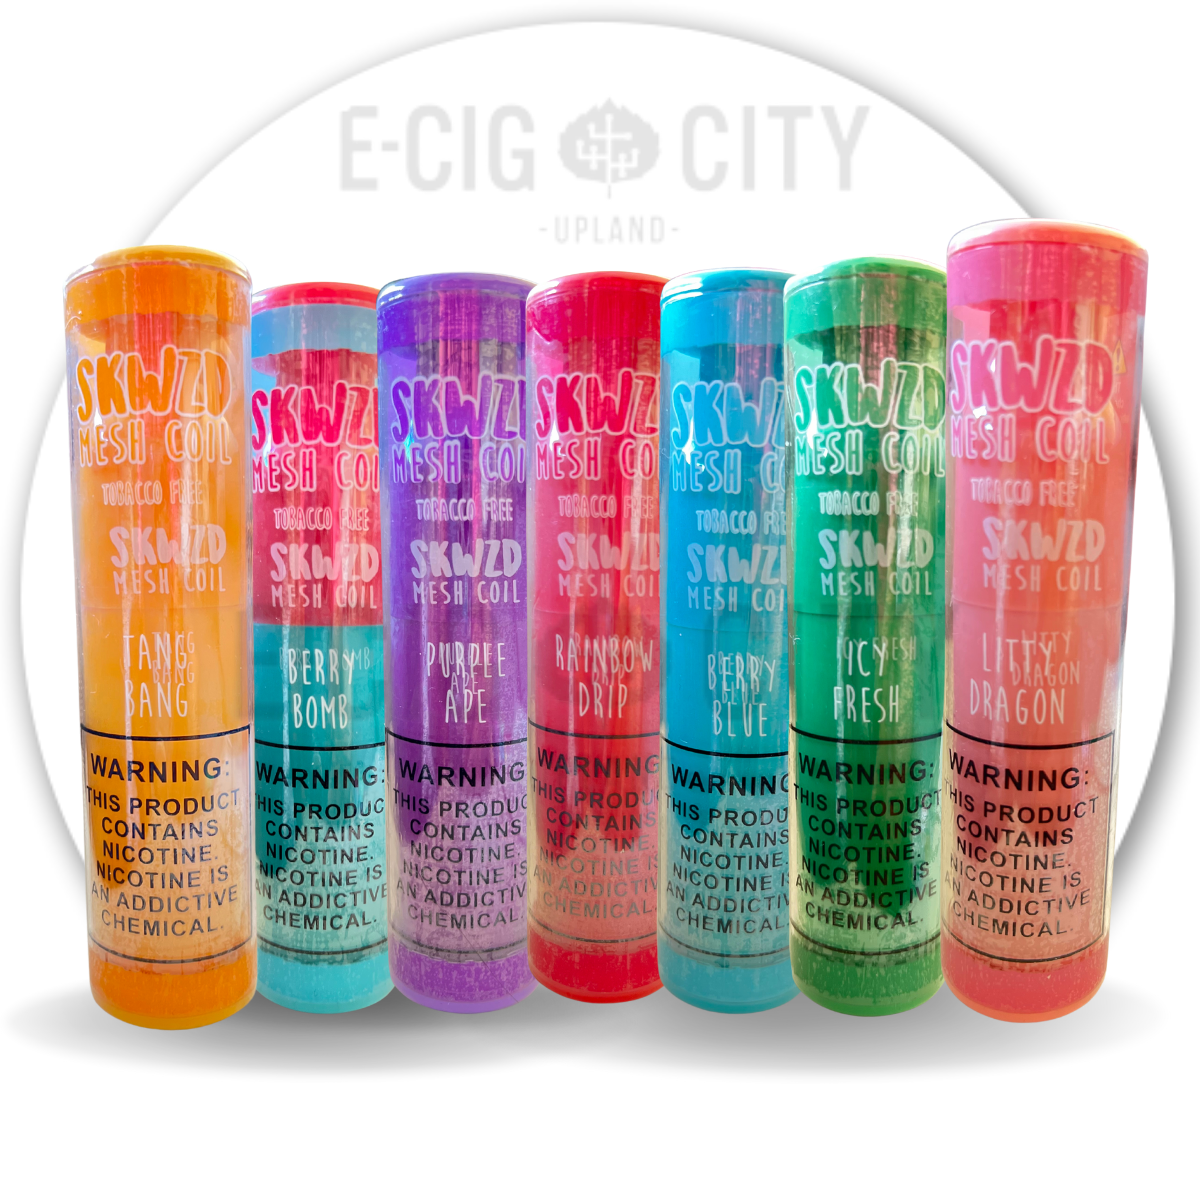 SKWZD 3000 Puff Disposable 5% – E-Cig City Upland